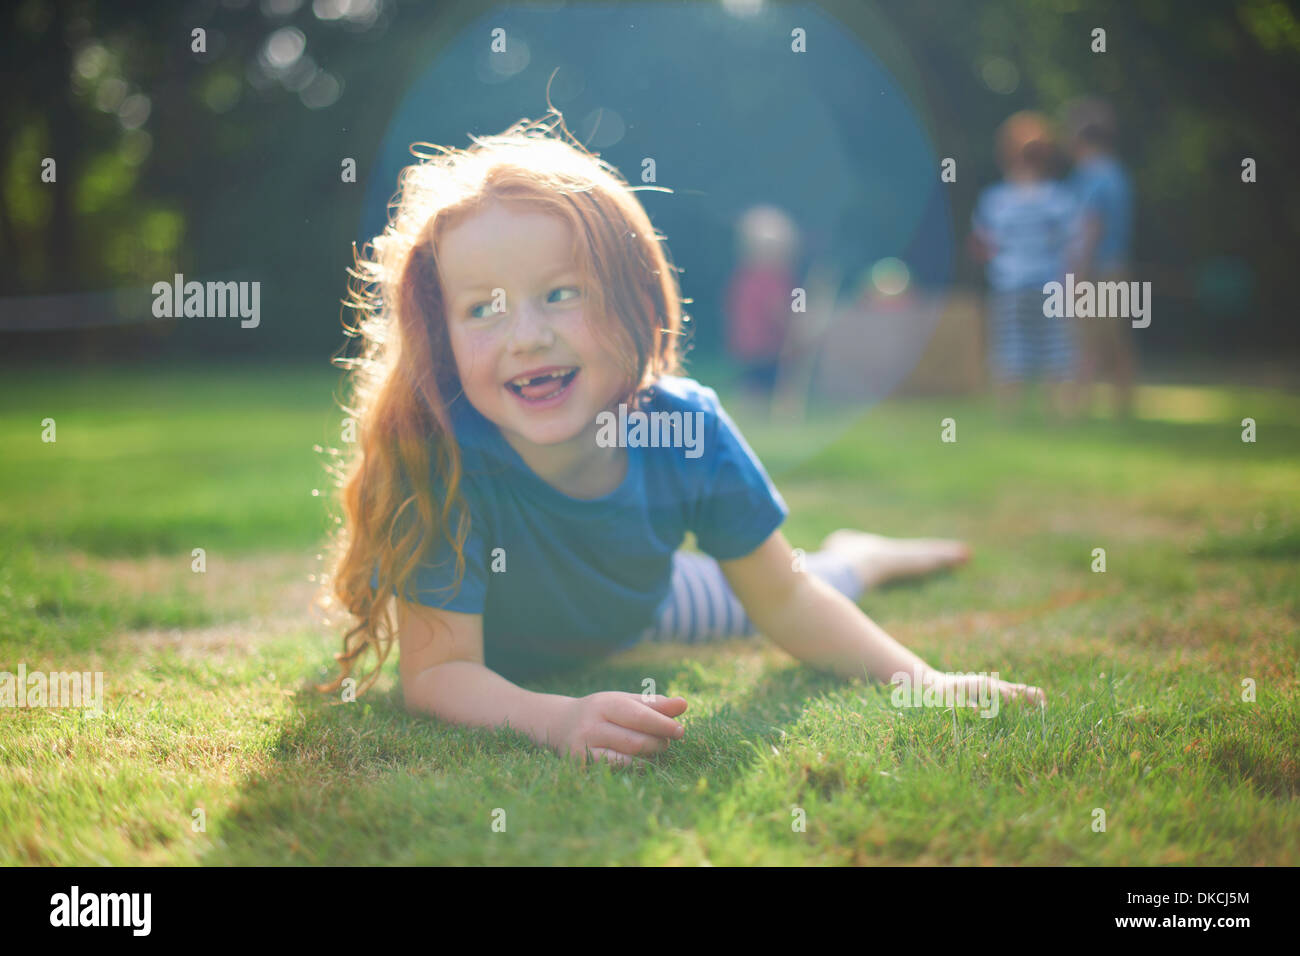 Happy young girl lying on grass in garden Banque D'Images